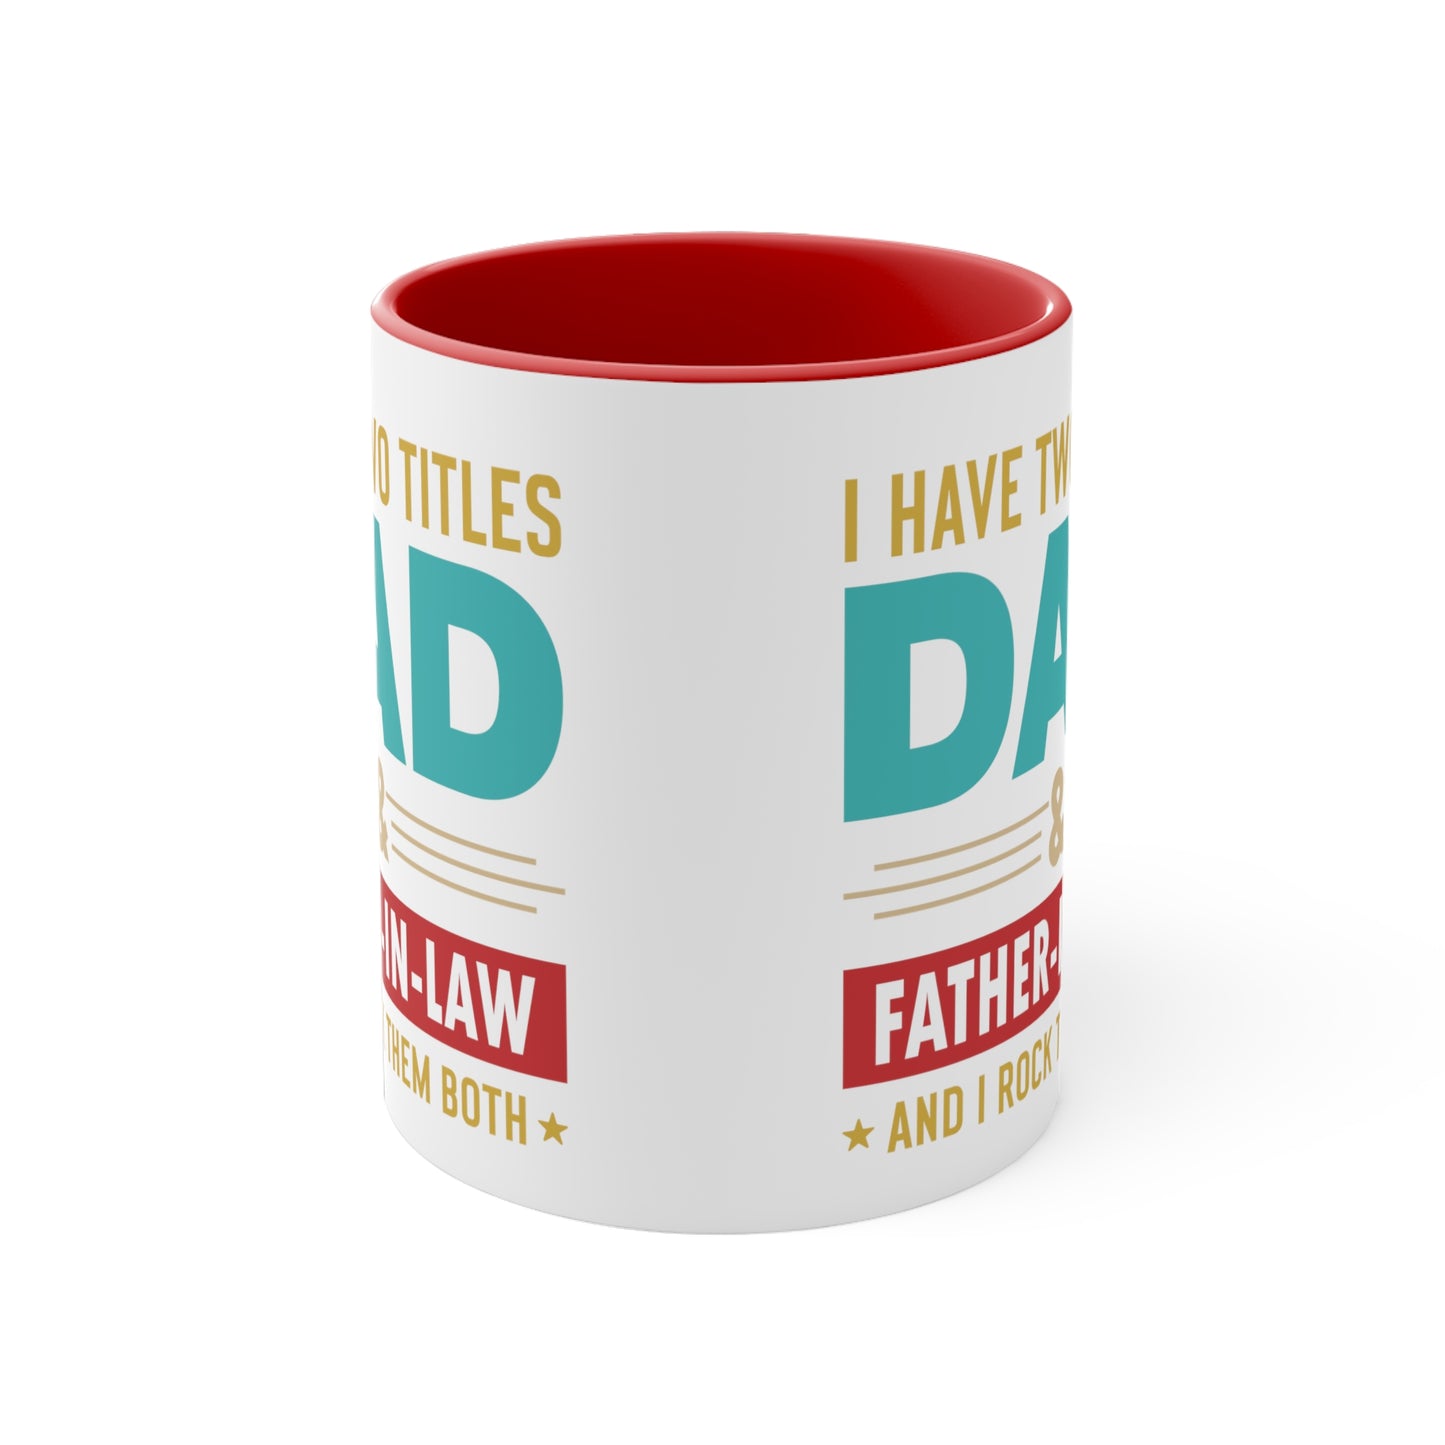 I have Two Titles Dad and Father-In-Law and I Rock Both Accent Coffee Mug, 11oz